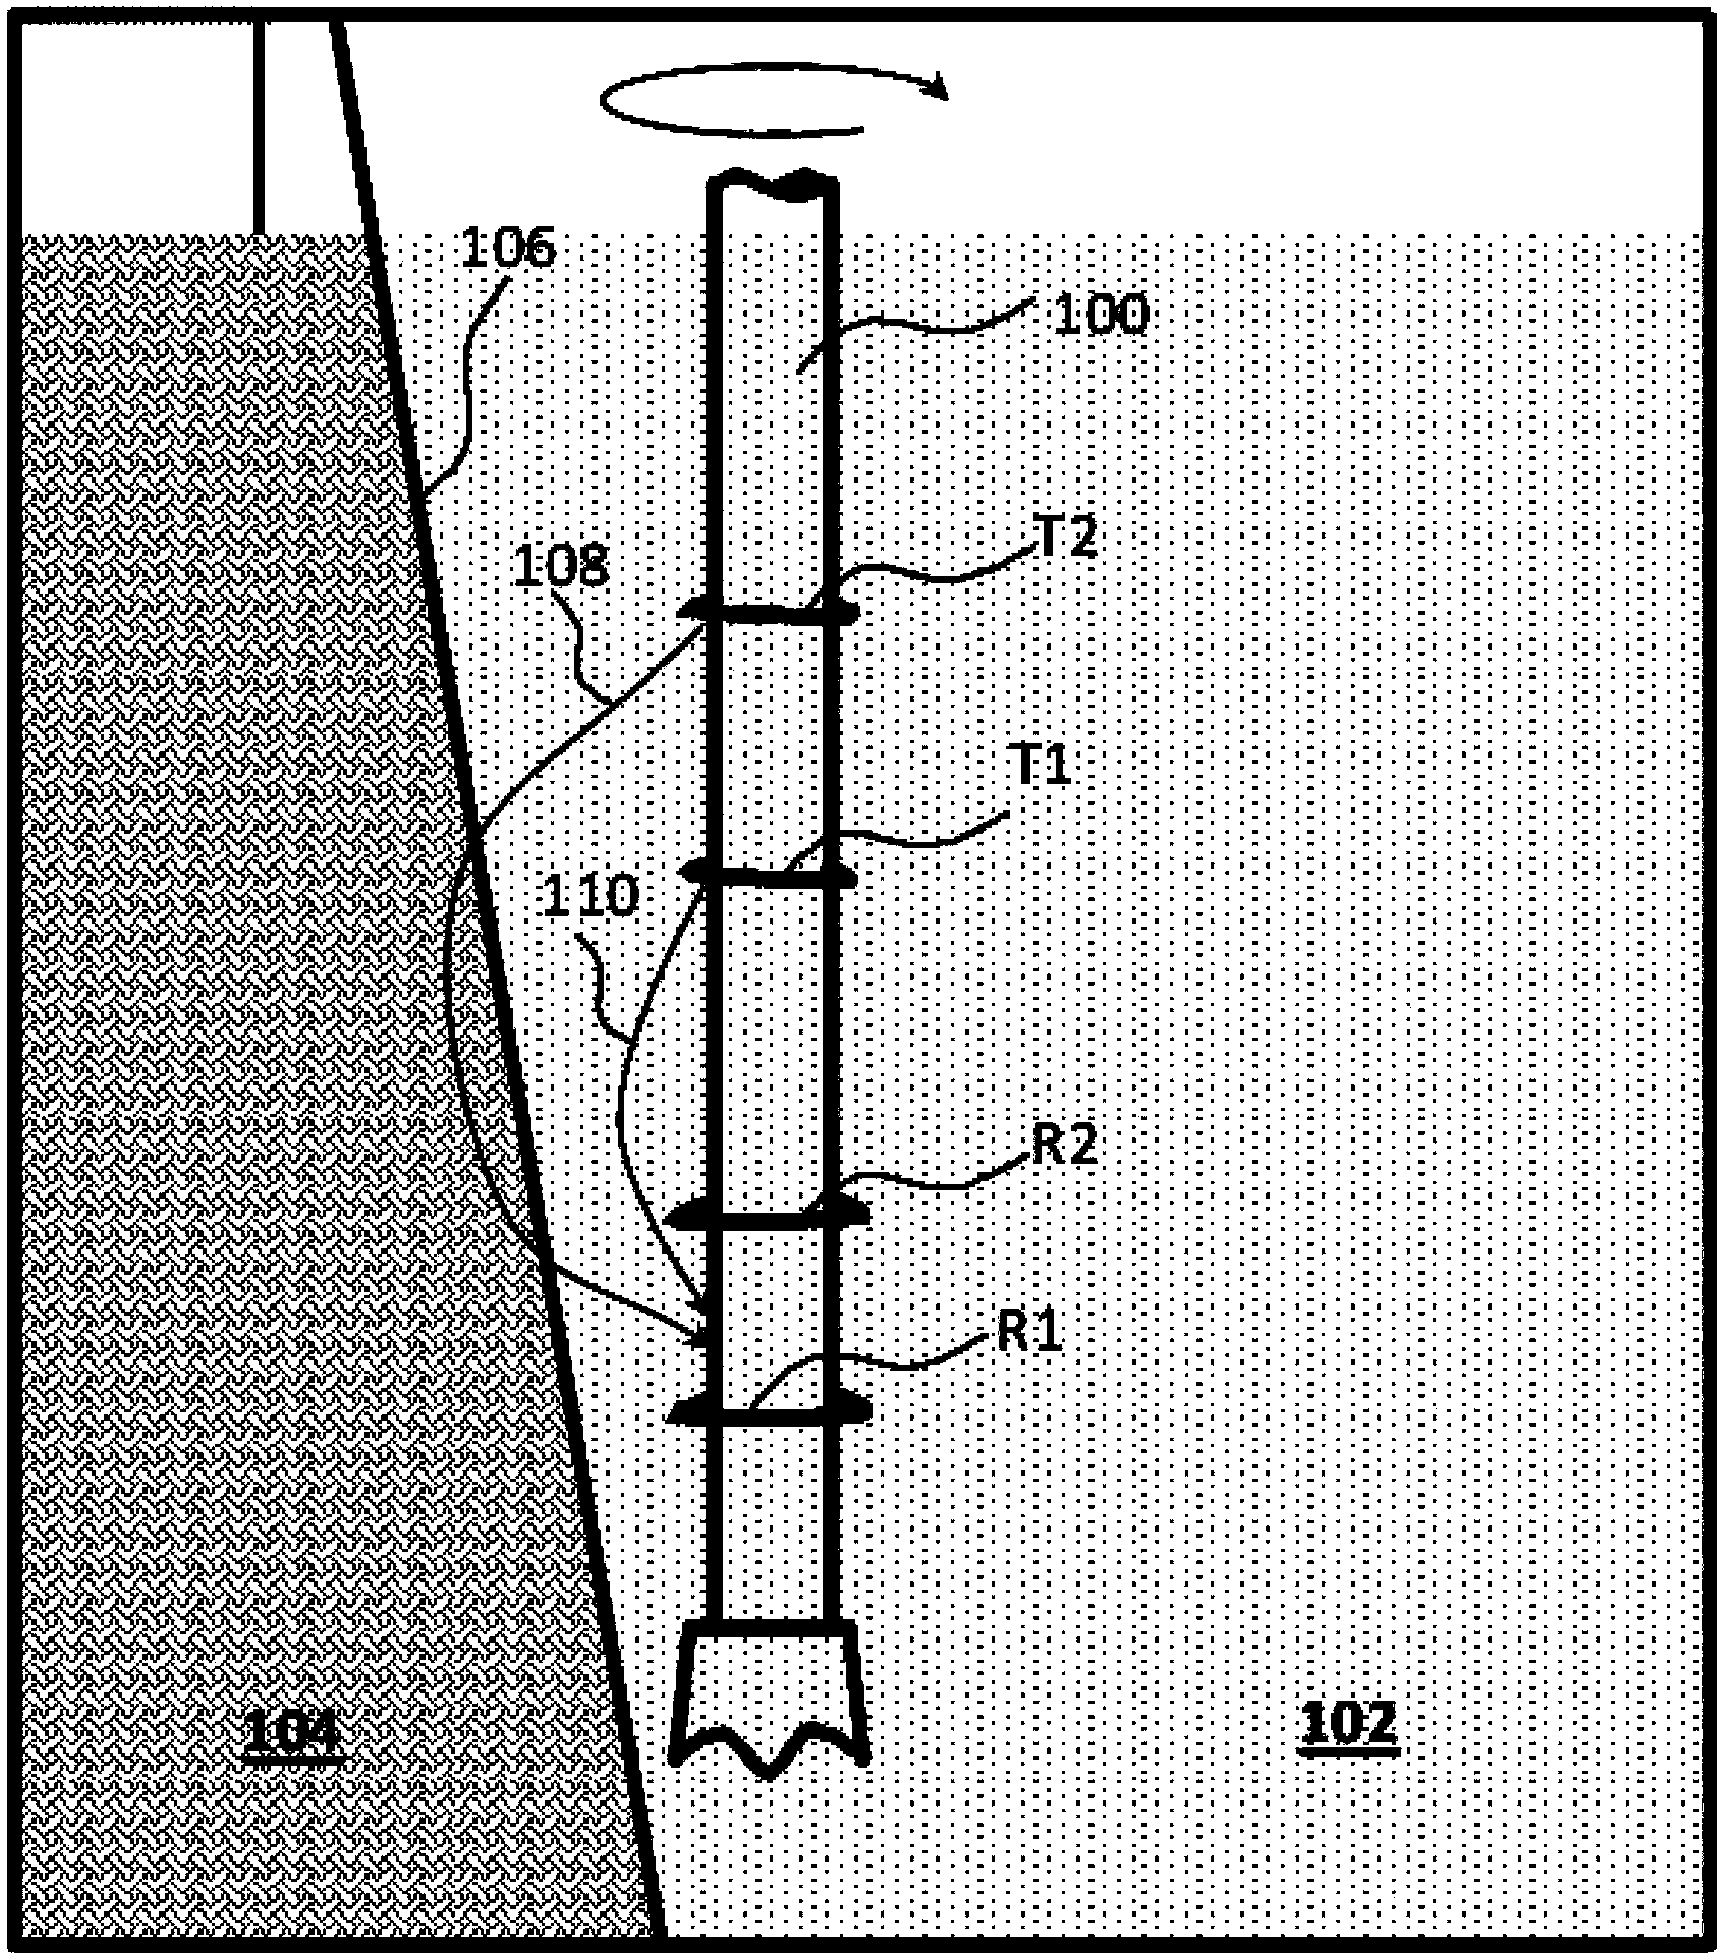 Method for detecting bed boundary